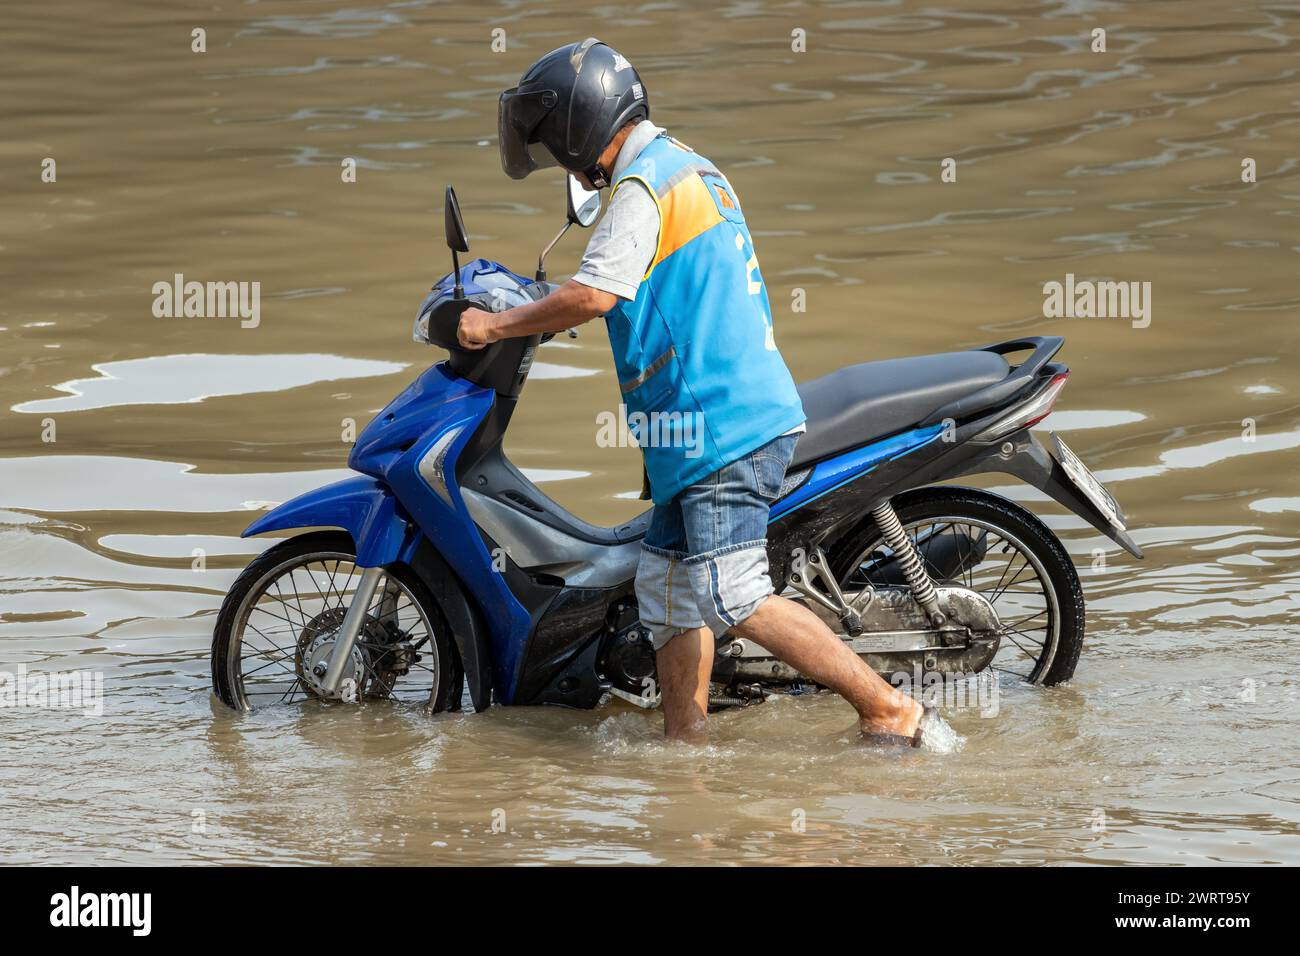 A moto-taxi driver pushes a motorbike through a flooded street, Thailand Stock Photo